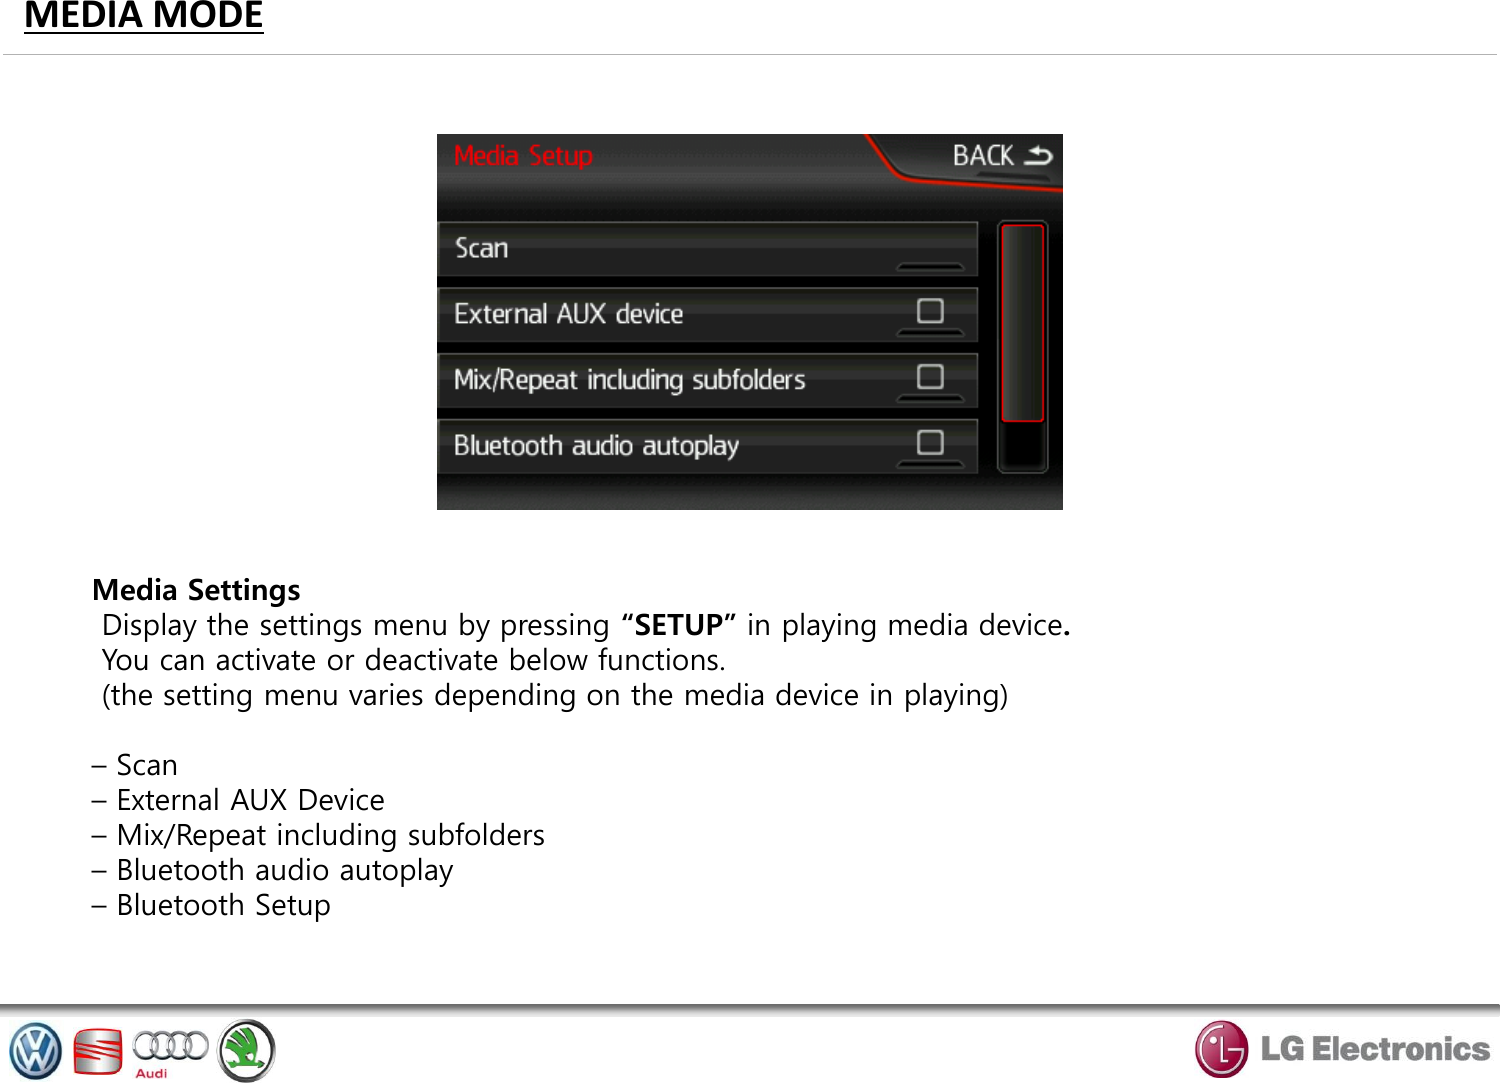 MEDIA MODE Media Settings  Display the settings menu by pressing “SETUP” in playing media device.  You can activate or deactivate below functions.  (the setting menu varies depending on the media device in playing)  – Scan – External AUX Device – Mix/Repeat including subfolders – Bluetooth audio autoplay – Bluetooth Setup 